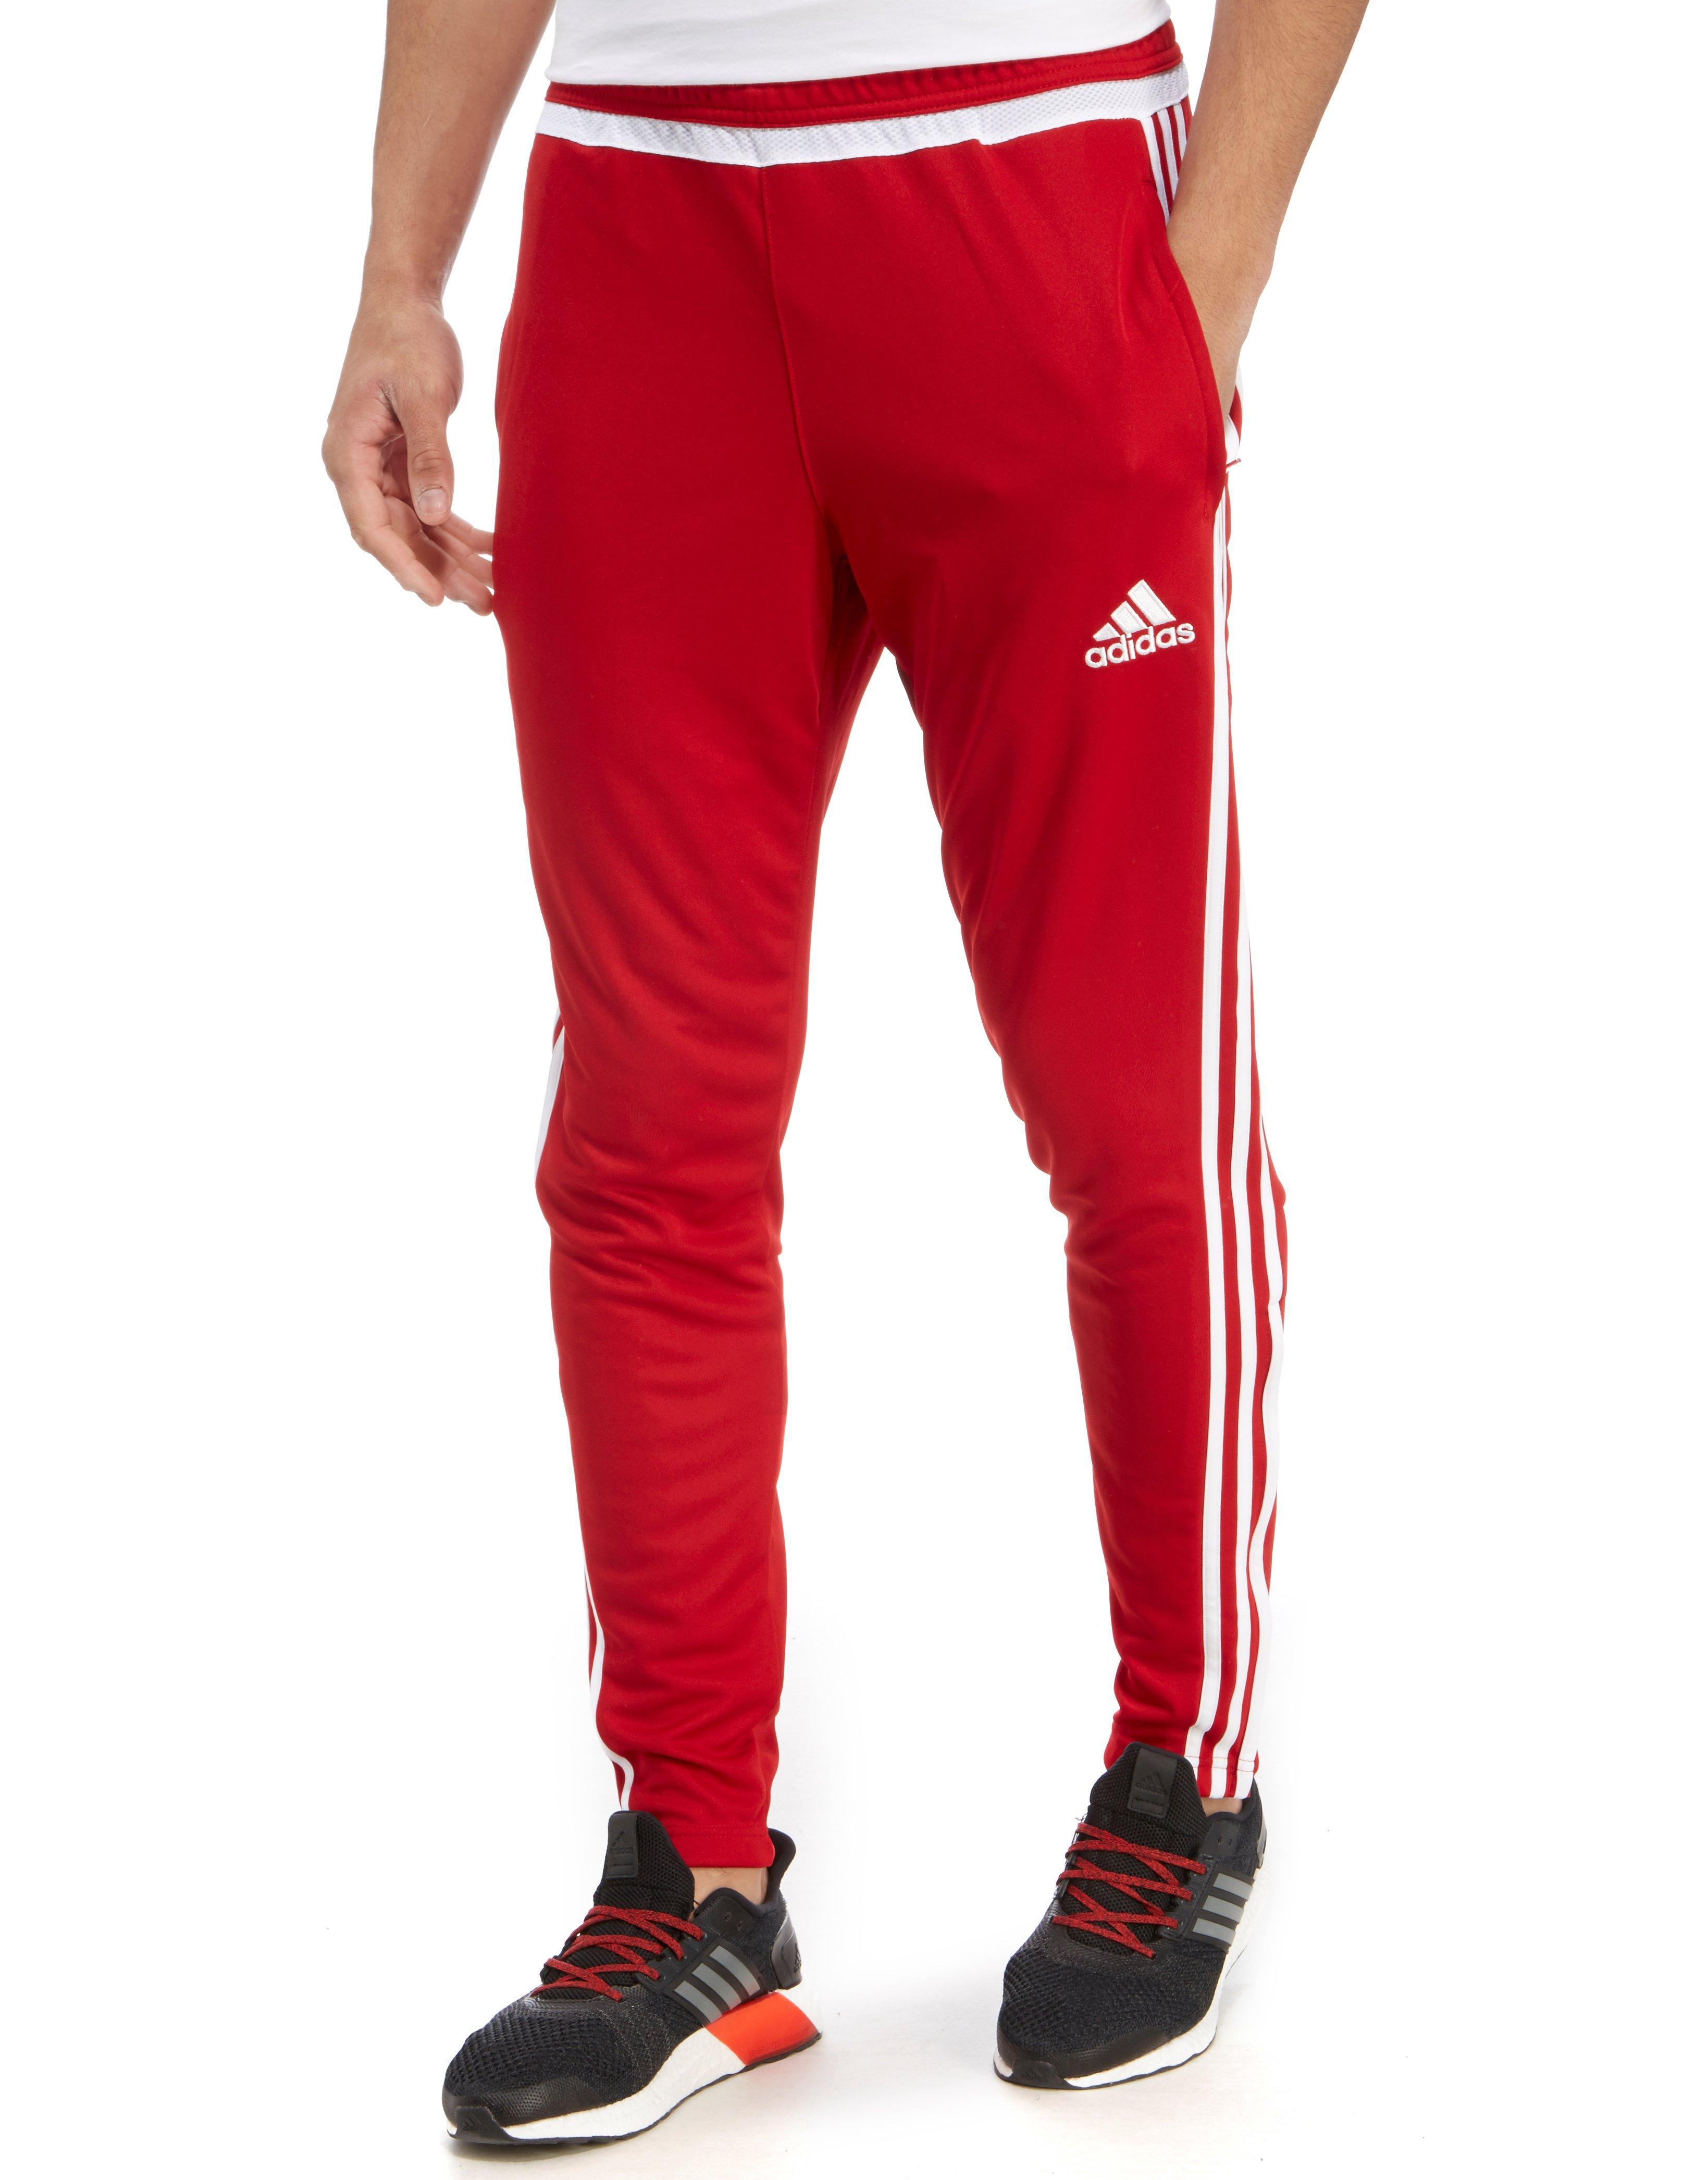 adidas Synthetic Tiro 15 Poly Training Pants in Red for Men - Lyst